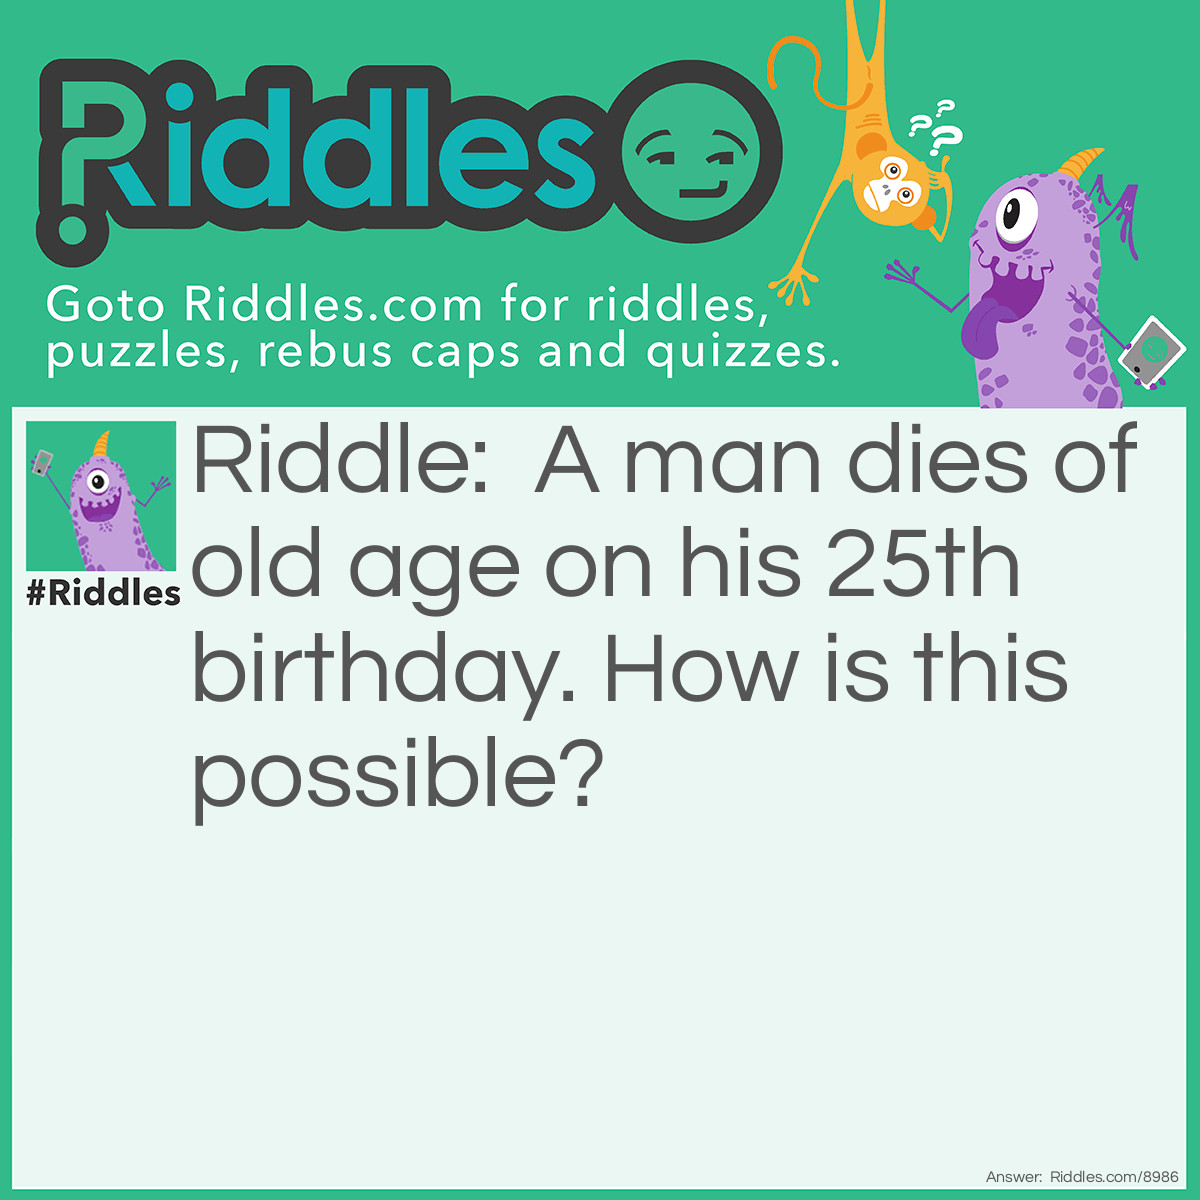 Riddle: A man dies of old age on his 25th birthday. How is this possible? Answer: He was born on February 29.